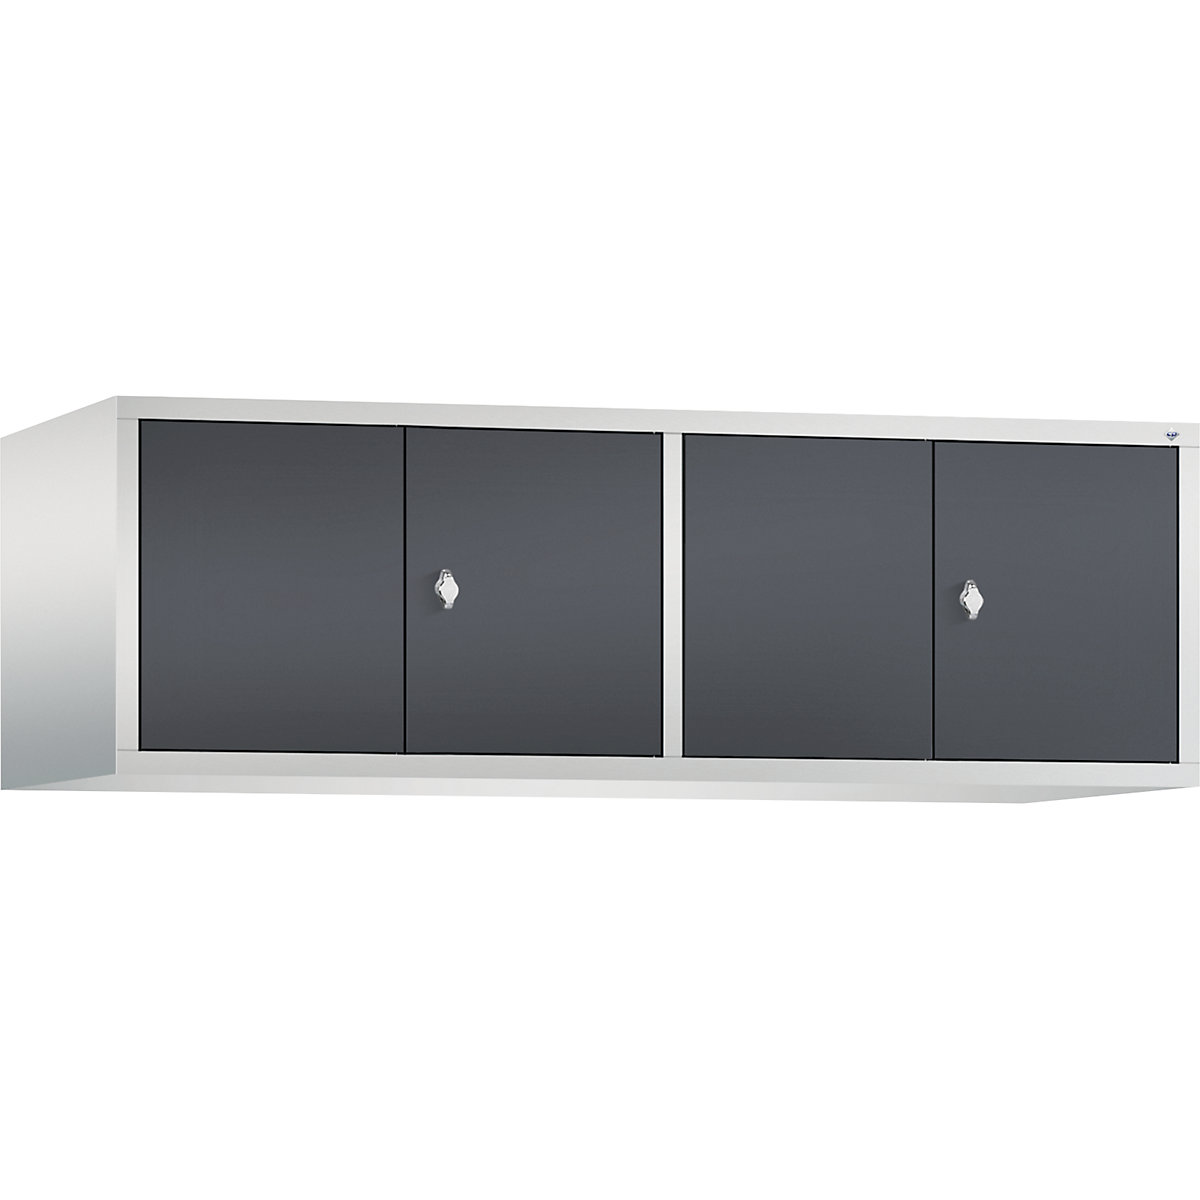 CLASSIC add-on cupboard, doors close in the middle – C+P, 4 compartments, compartment width 400 mm, light grey / black grey-9